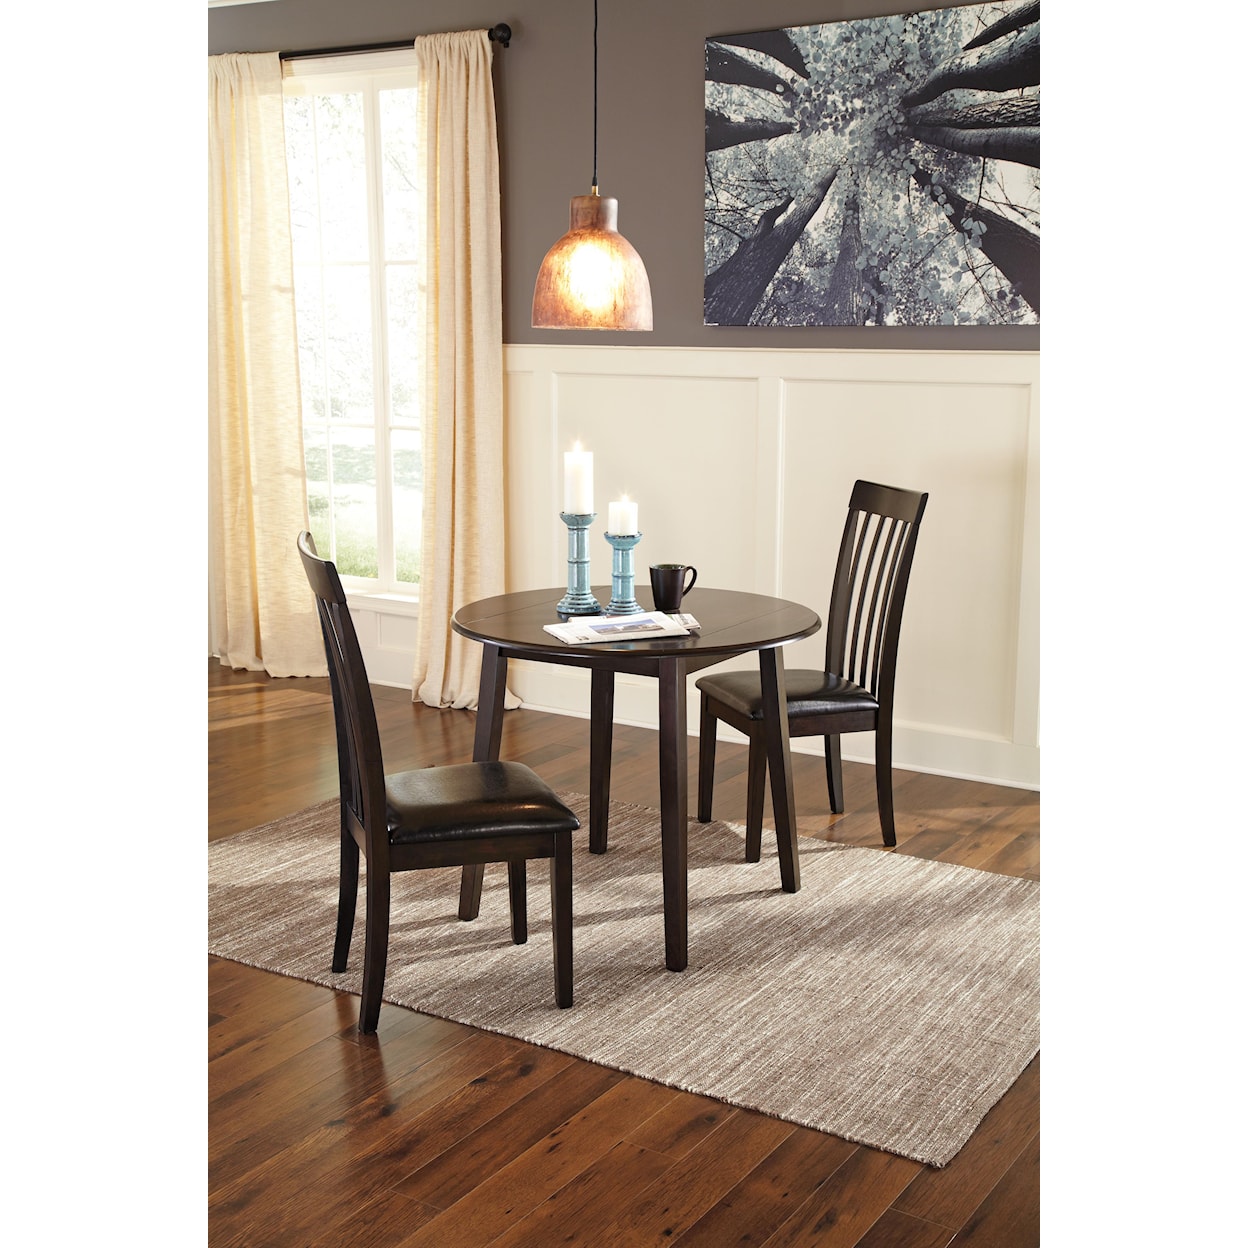 Signature Design by Ashley Furniture Hammis Round Dining Room Drop Leaf Table